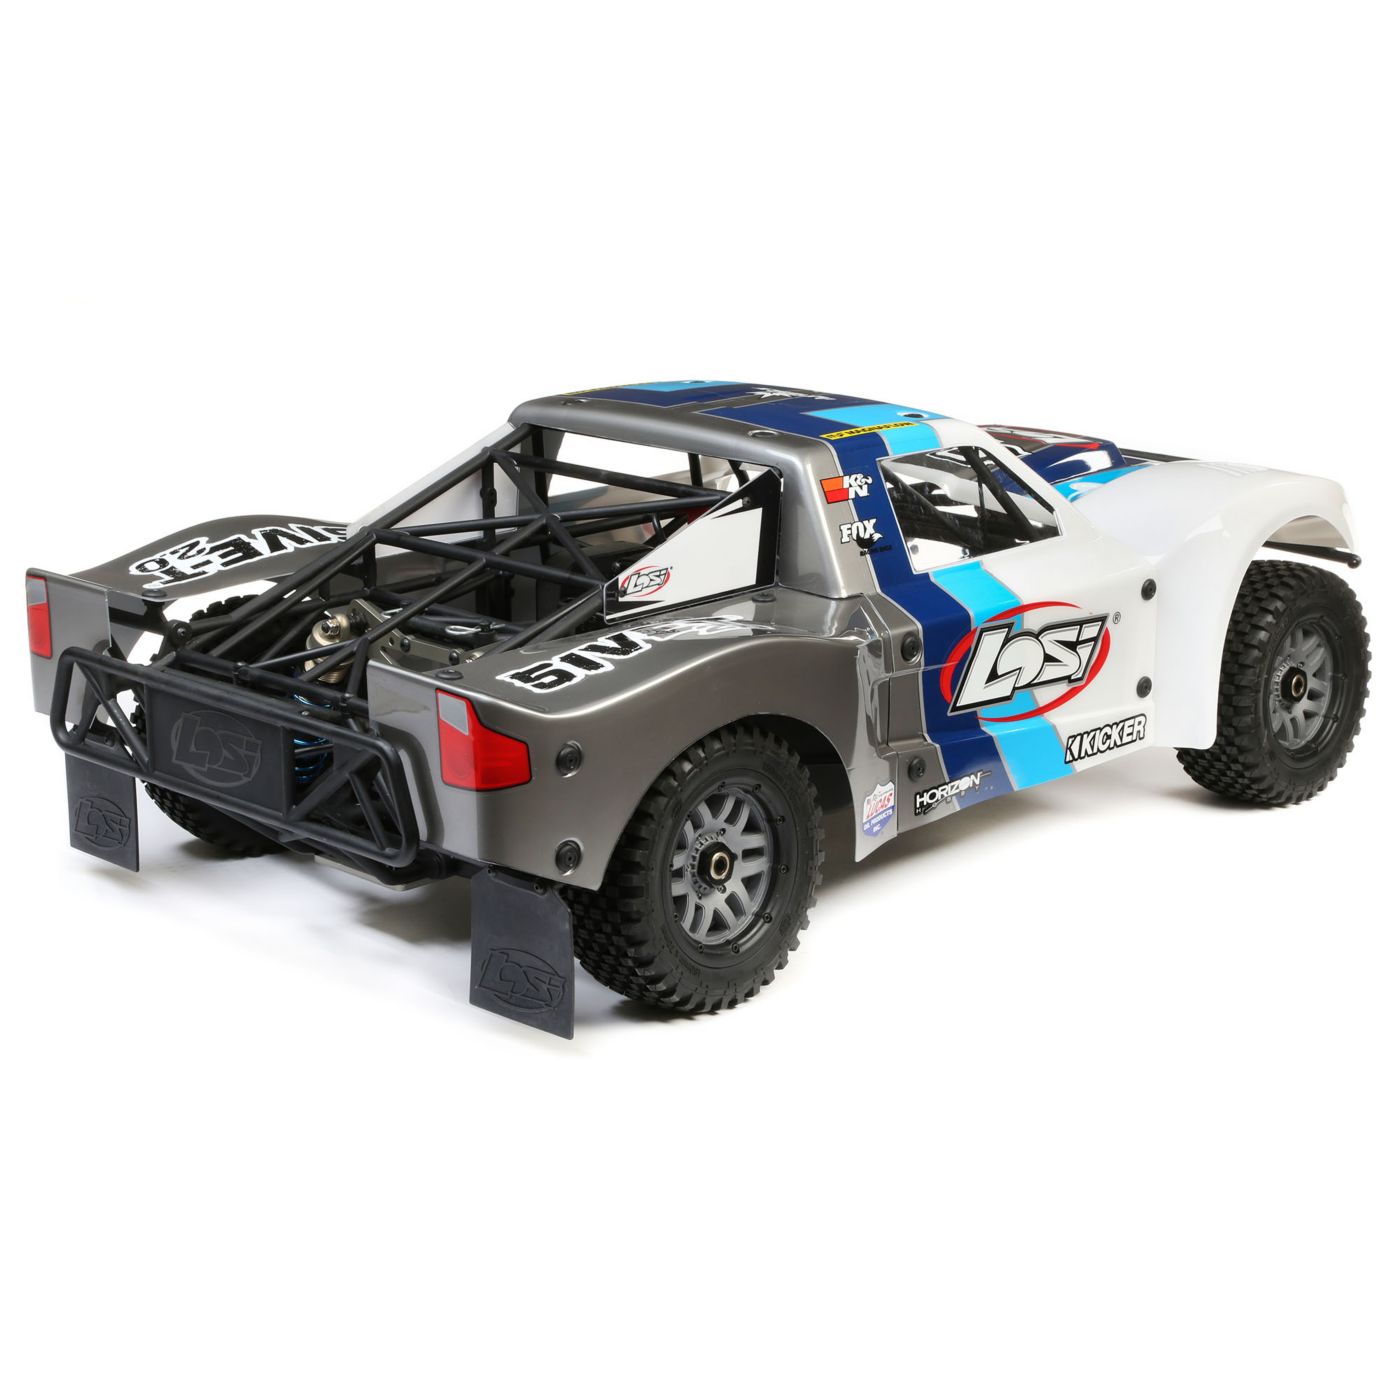 Losi 5ive-t 2 Short Course Truck - Rear